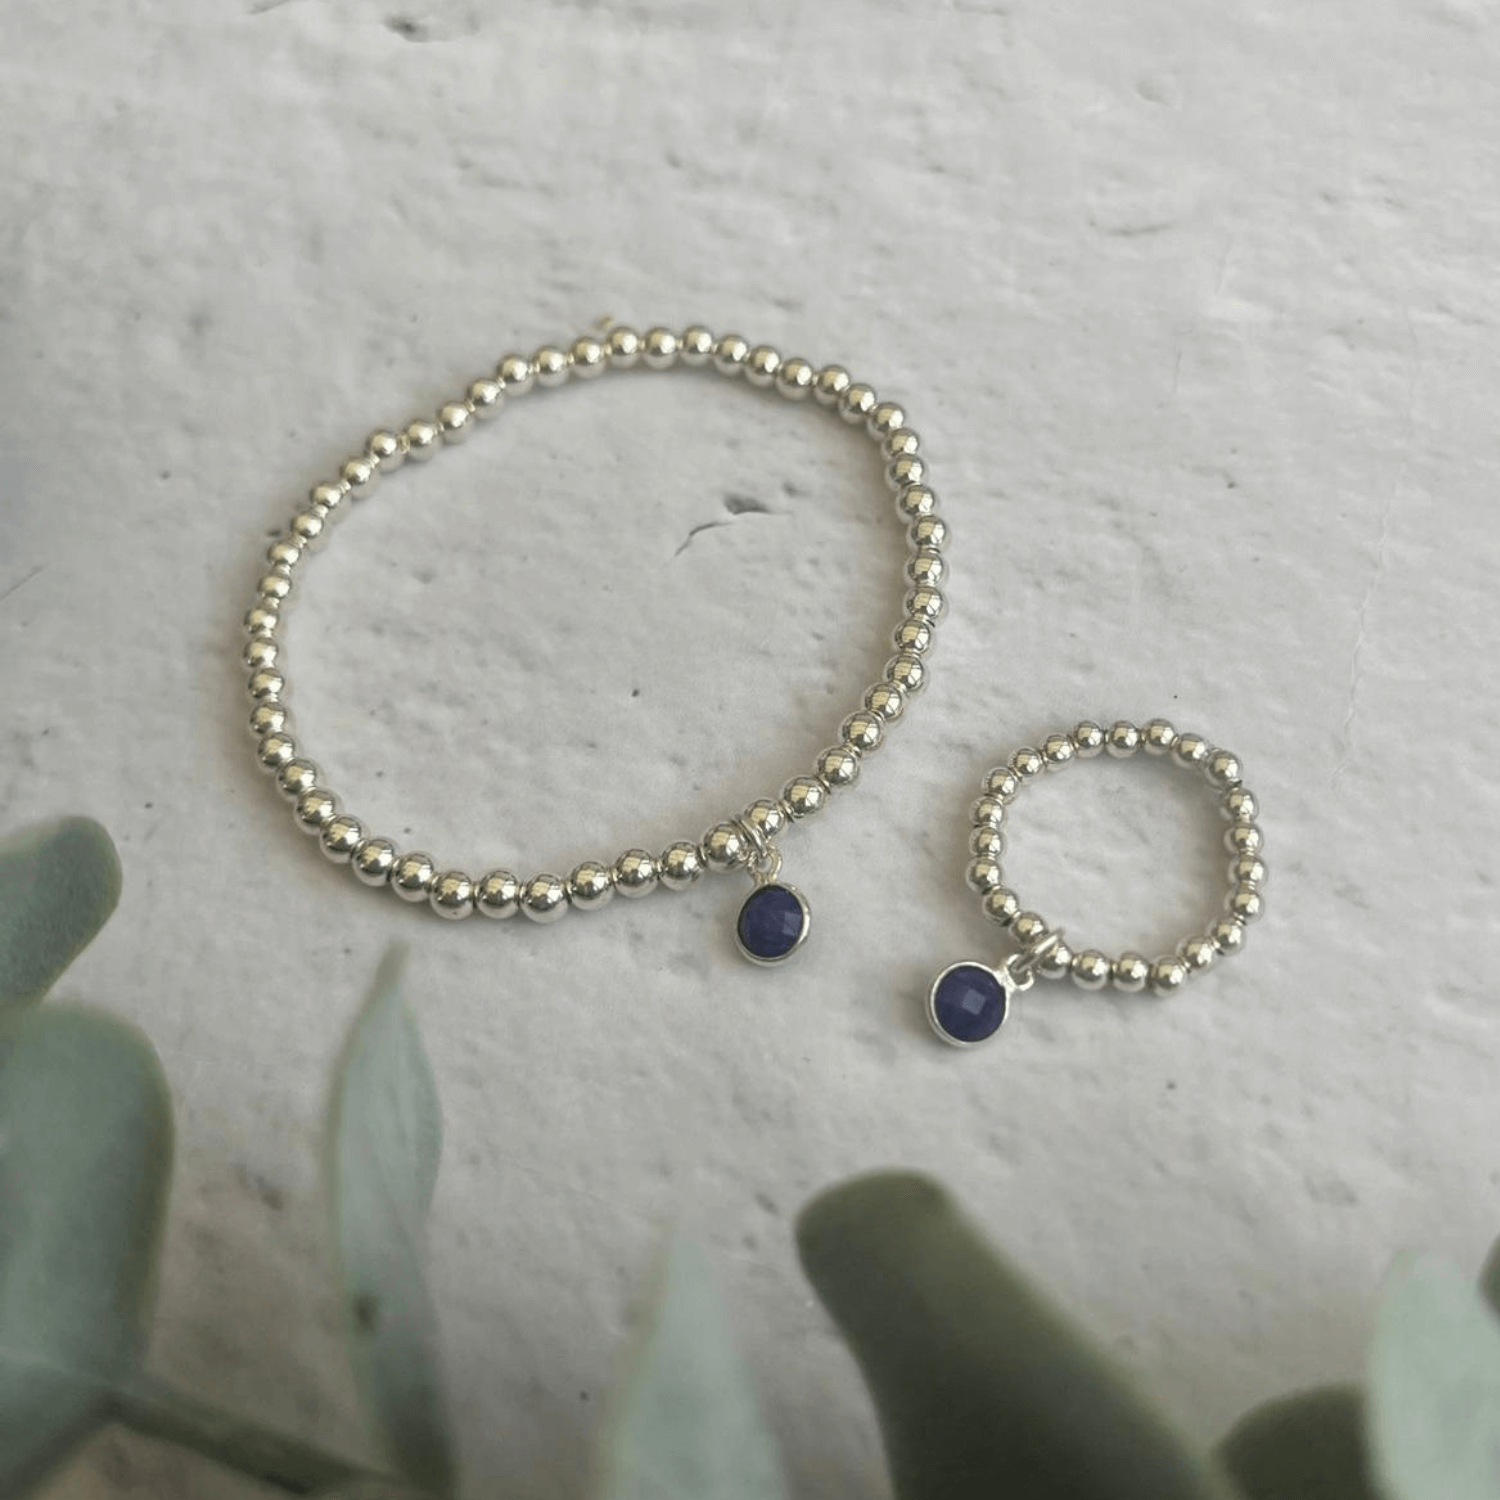 A beaded bracelet and matching ring from the Sapphire Jewellery Sets by Made Here with Love are shown on a light-colored, textured surface. Both pieces are made of small silver beads and have a small circular blue charm. Eucalyptus leaves are partially visible in the bottom left corner of the image.